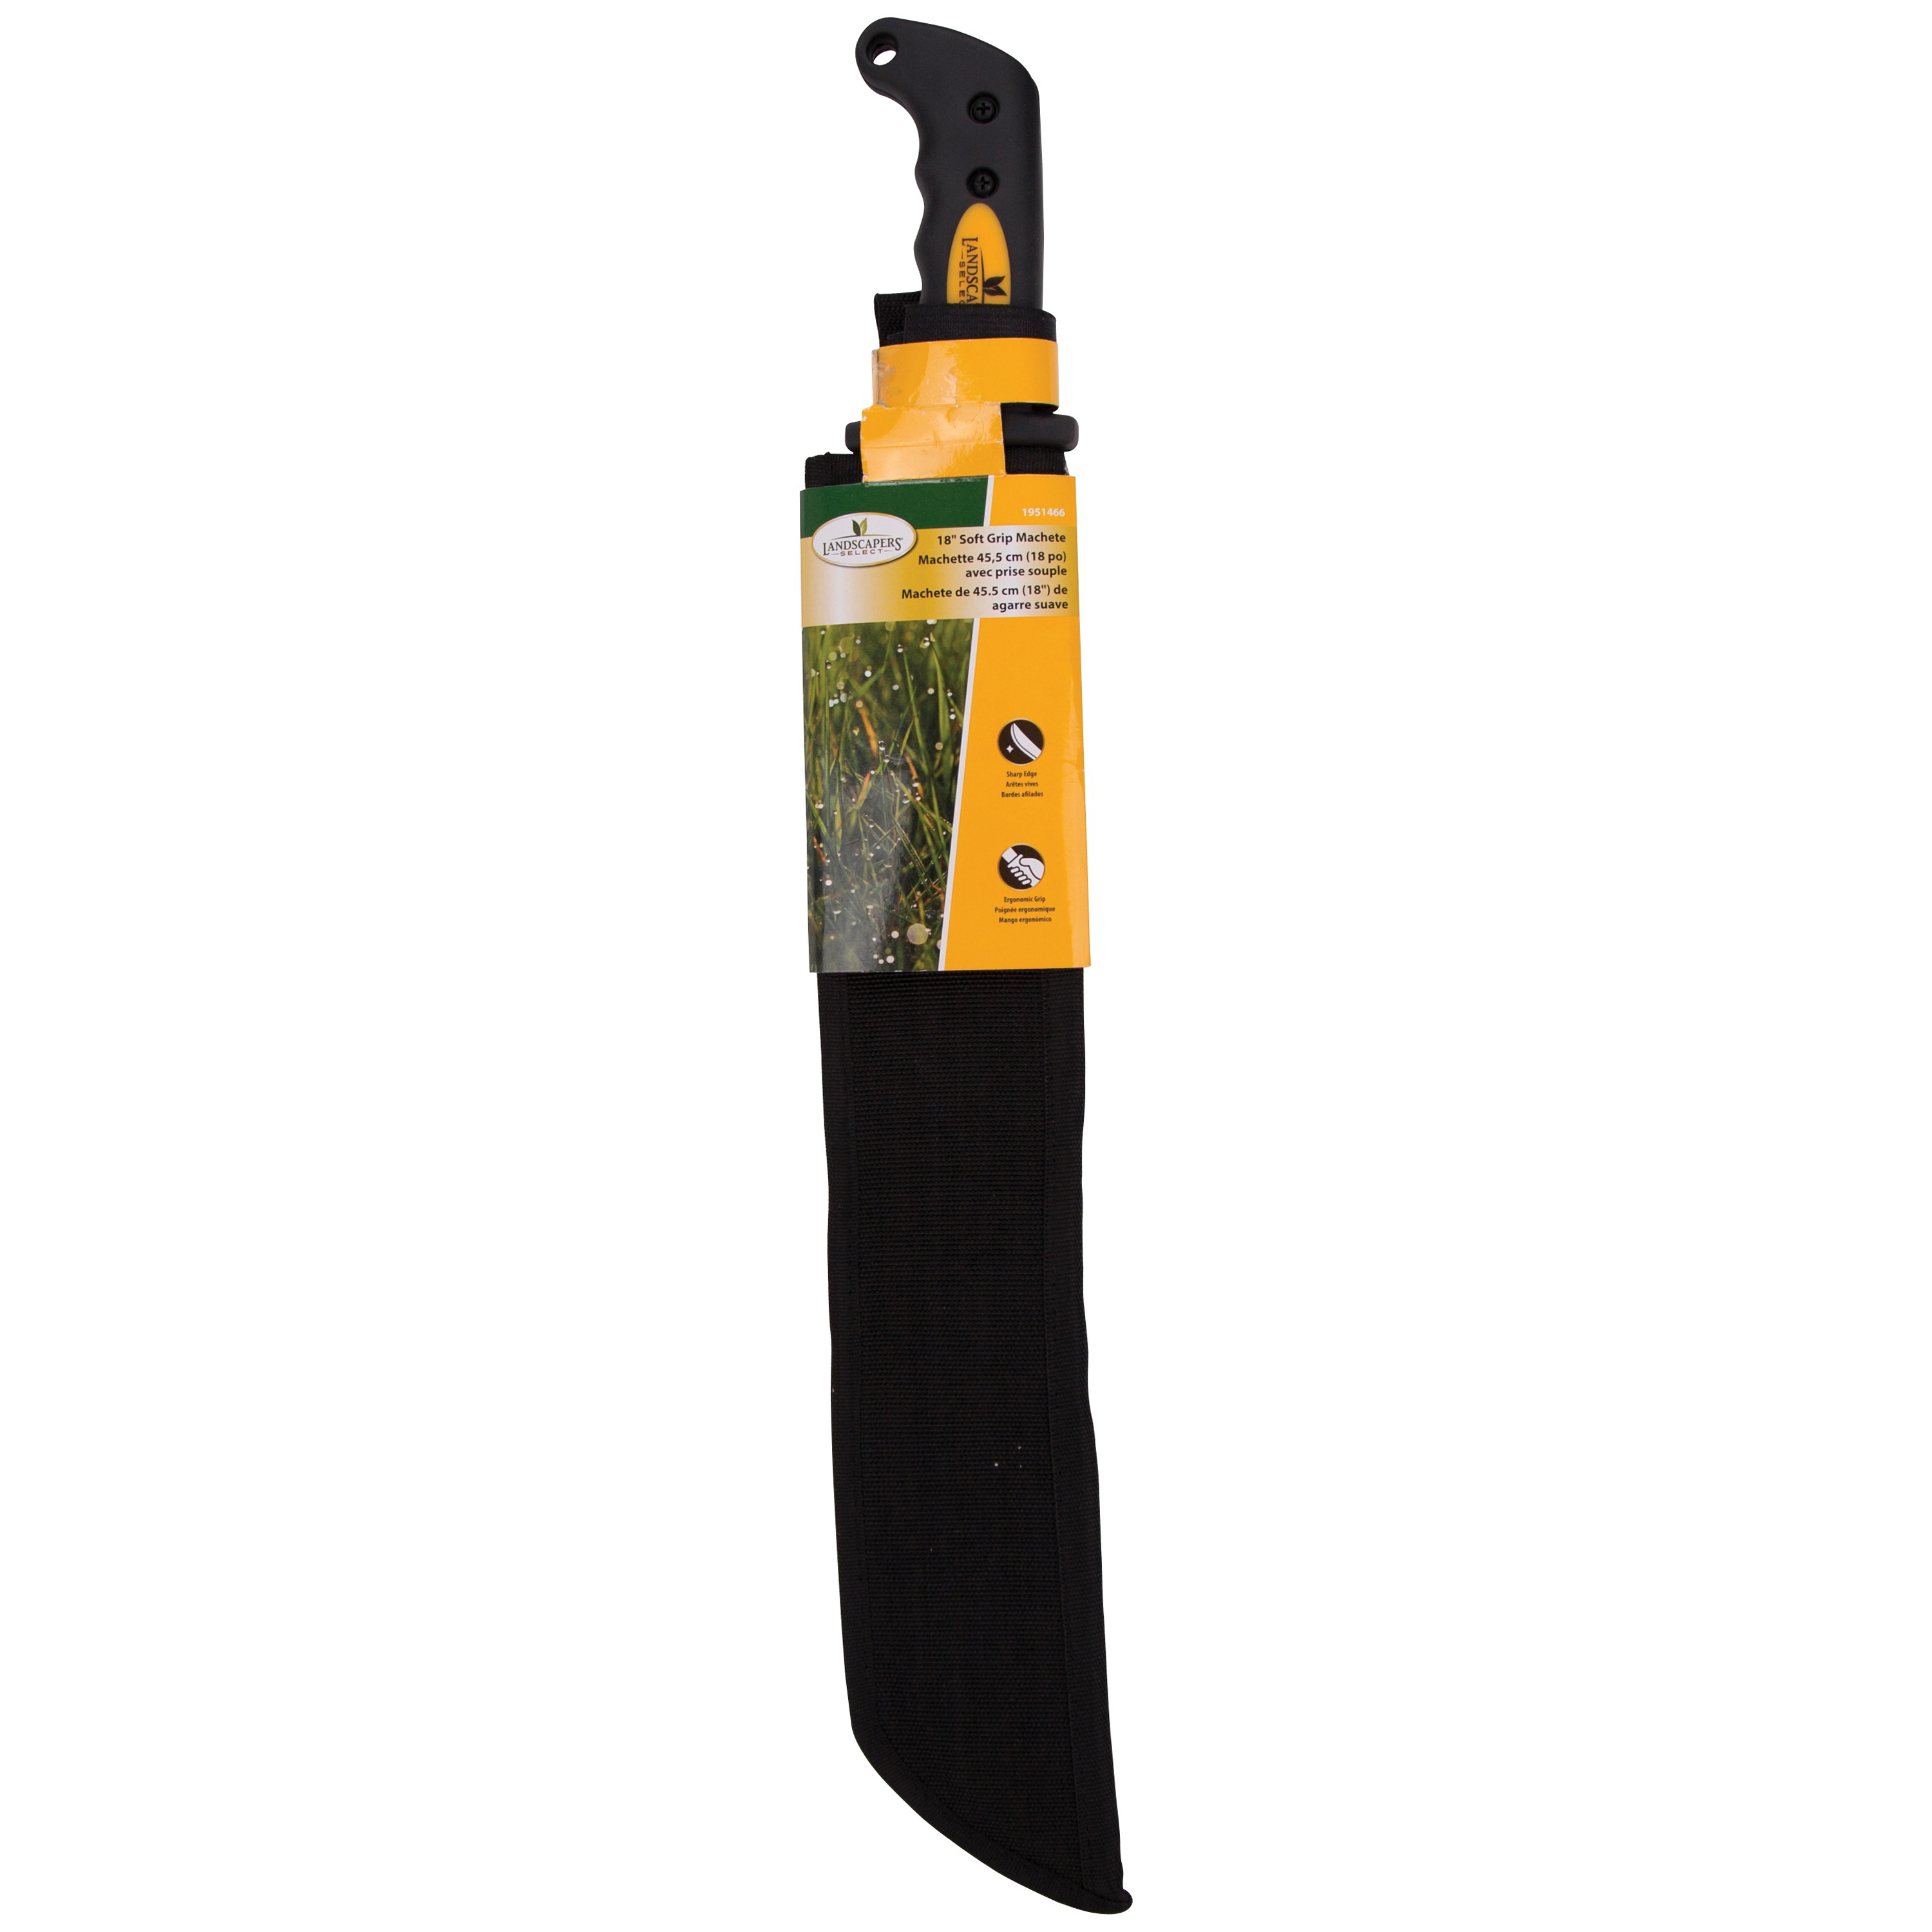 Landscapers Select JLO-006-N3L 18 in Blade, 23-1/2 in OAL, 18 in Blade, High Carbon Steel Blade, Rubber Handle - 2